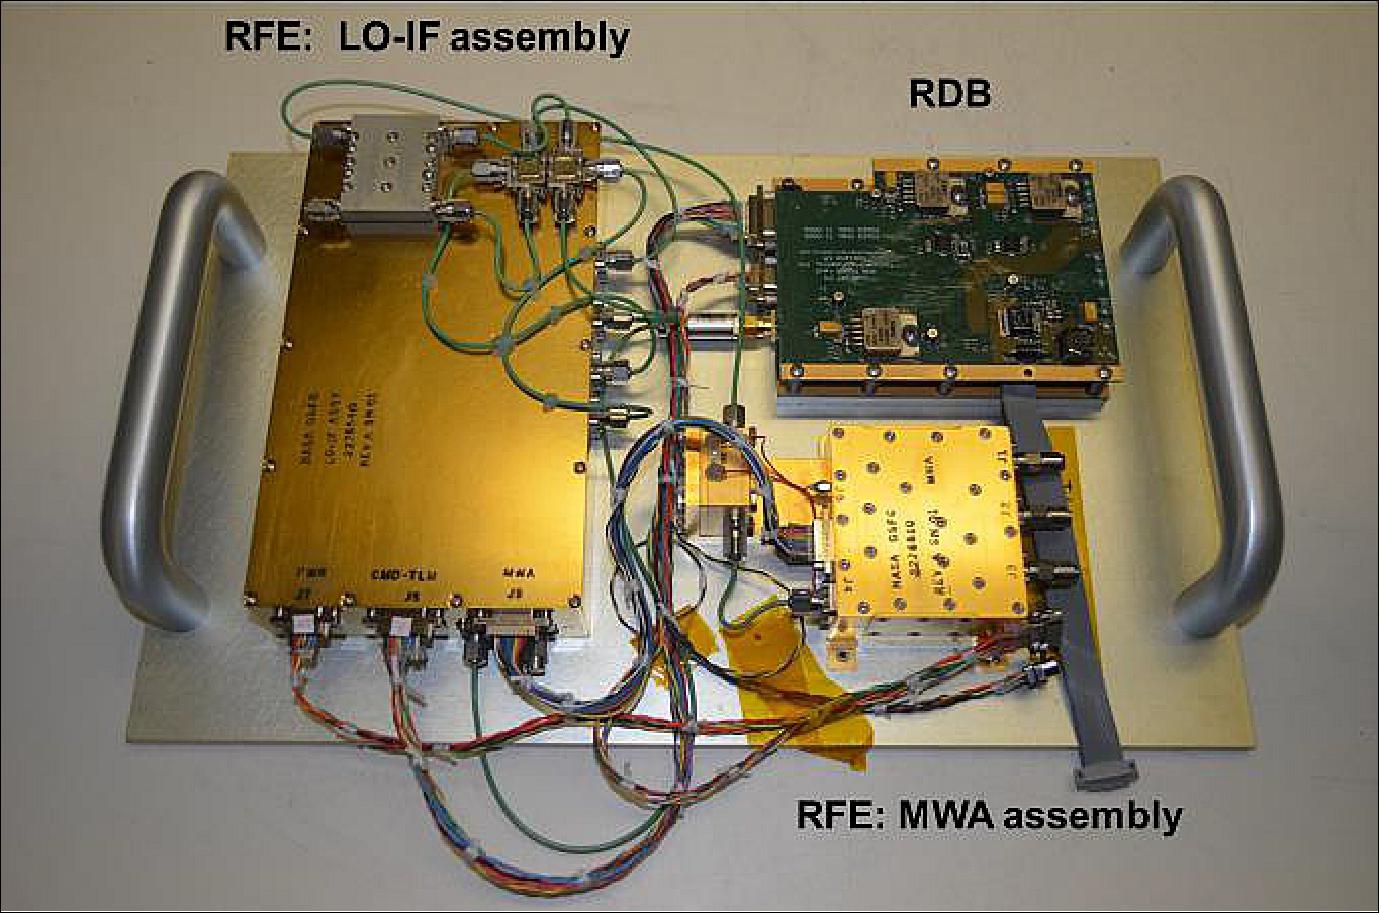 Figure 6: CubeRRT RFE and RDB subsystems, integrated for payload testing (image credit: CubeRRT Team)